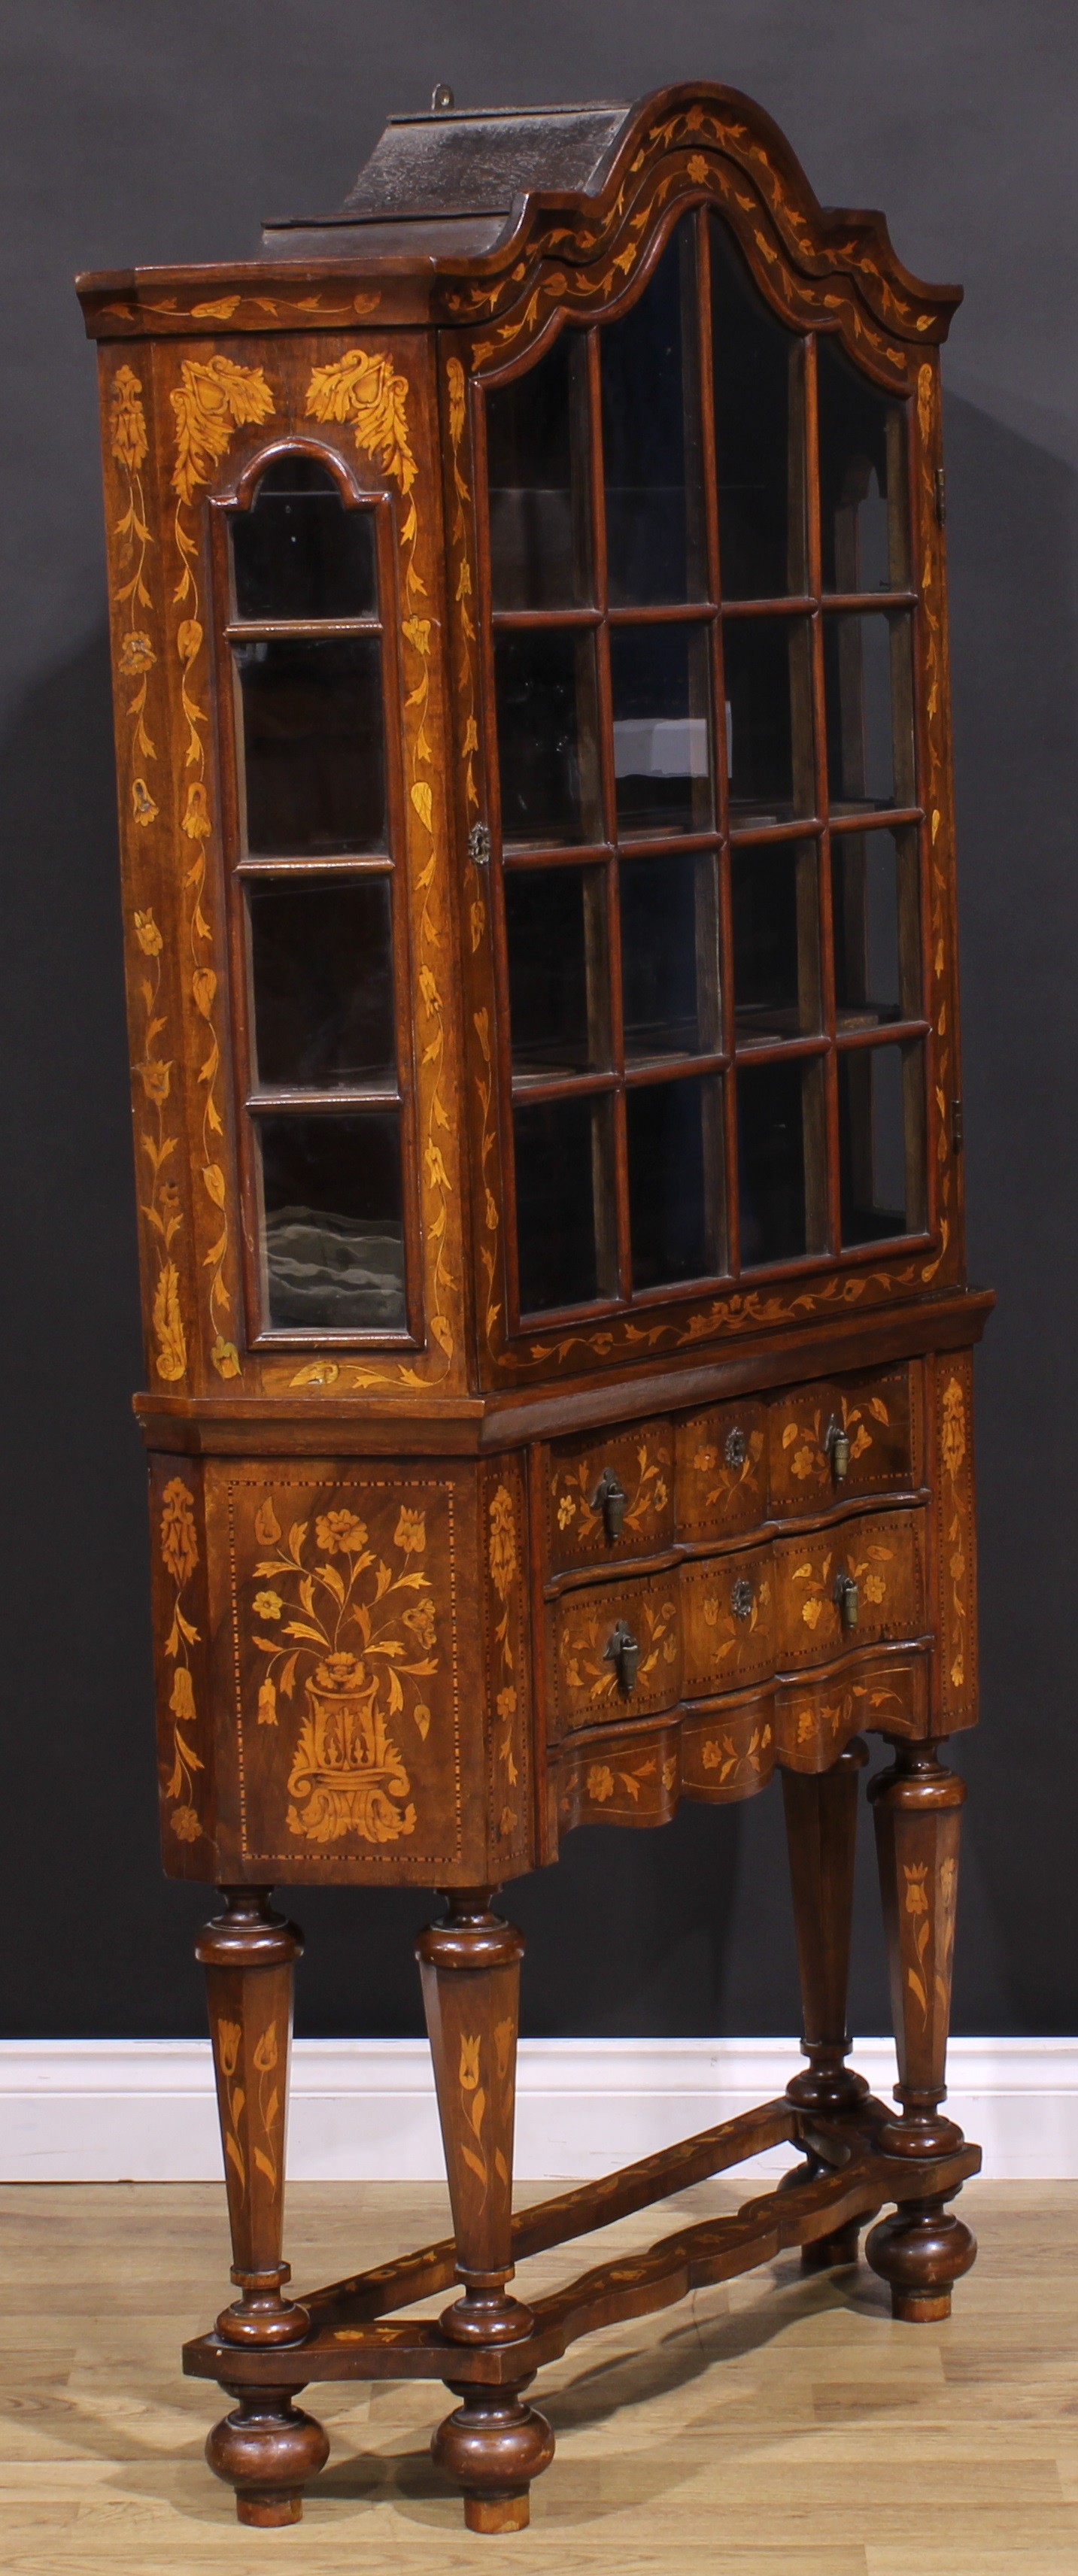 An 18th century style Dutch marquetry display cabinet, of small and neat proportions, arched cornice - Image 3 of 5